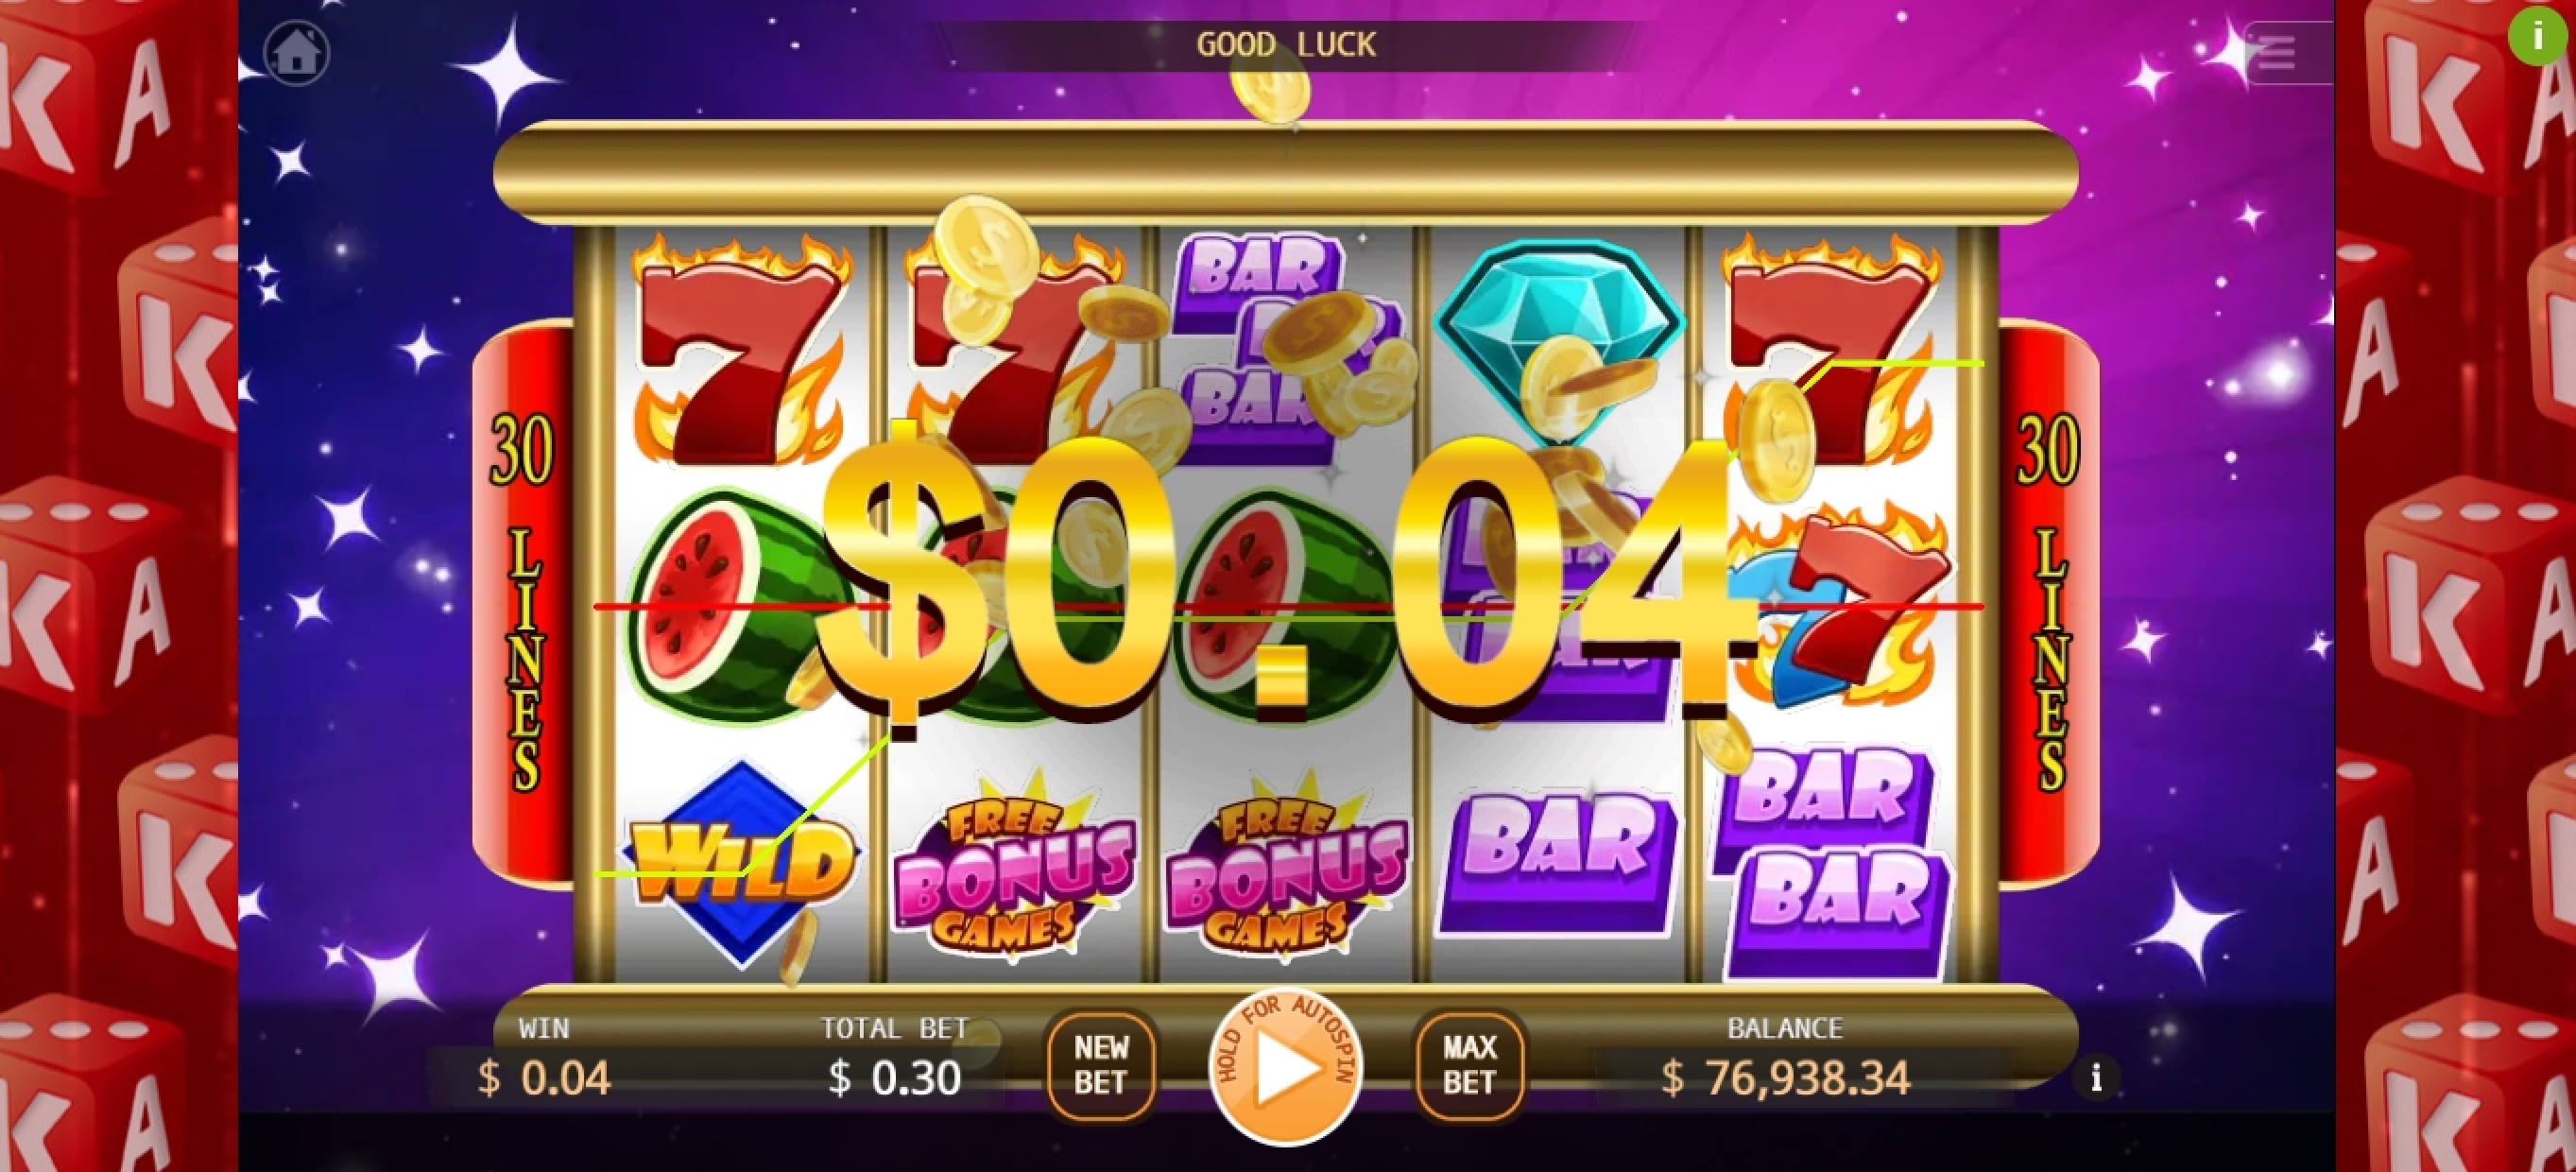 Win Money in Fast Blast Free Slot Game by KA Gaming